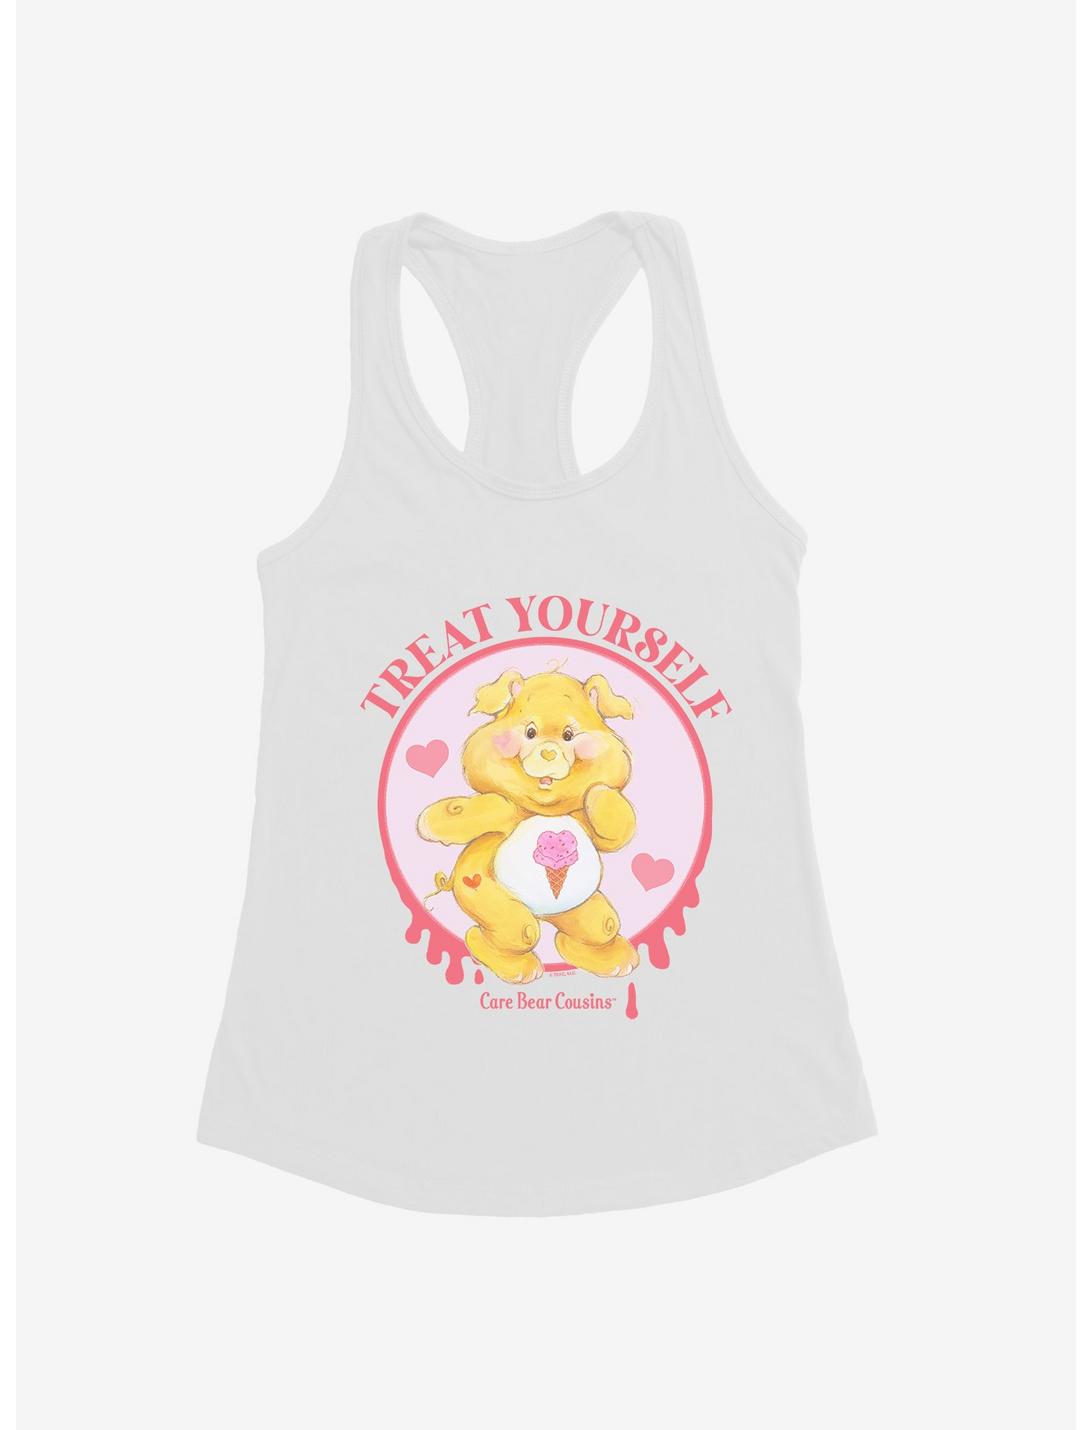 Care Bear Cousins Treat Heart Pig Treat Yourself Womens Tank Top, WHITE, hi-res